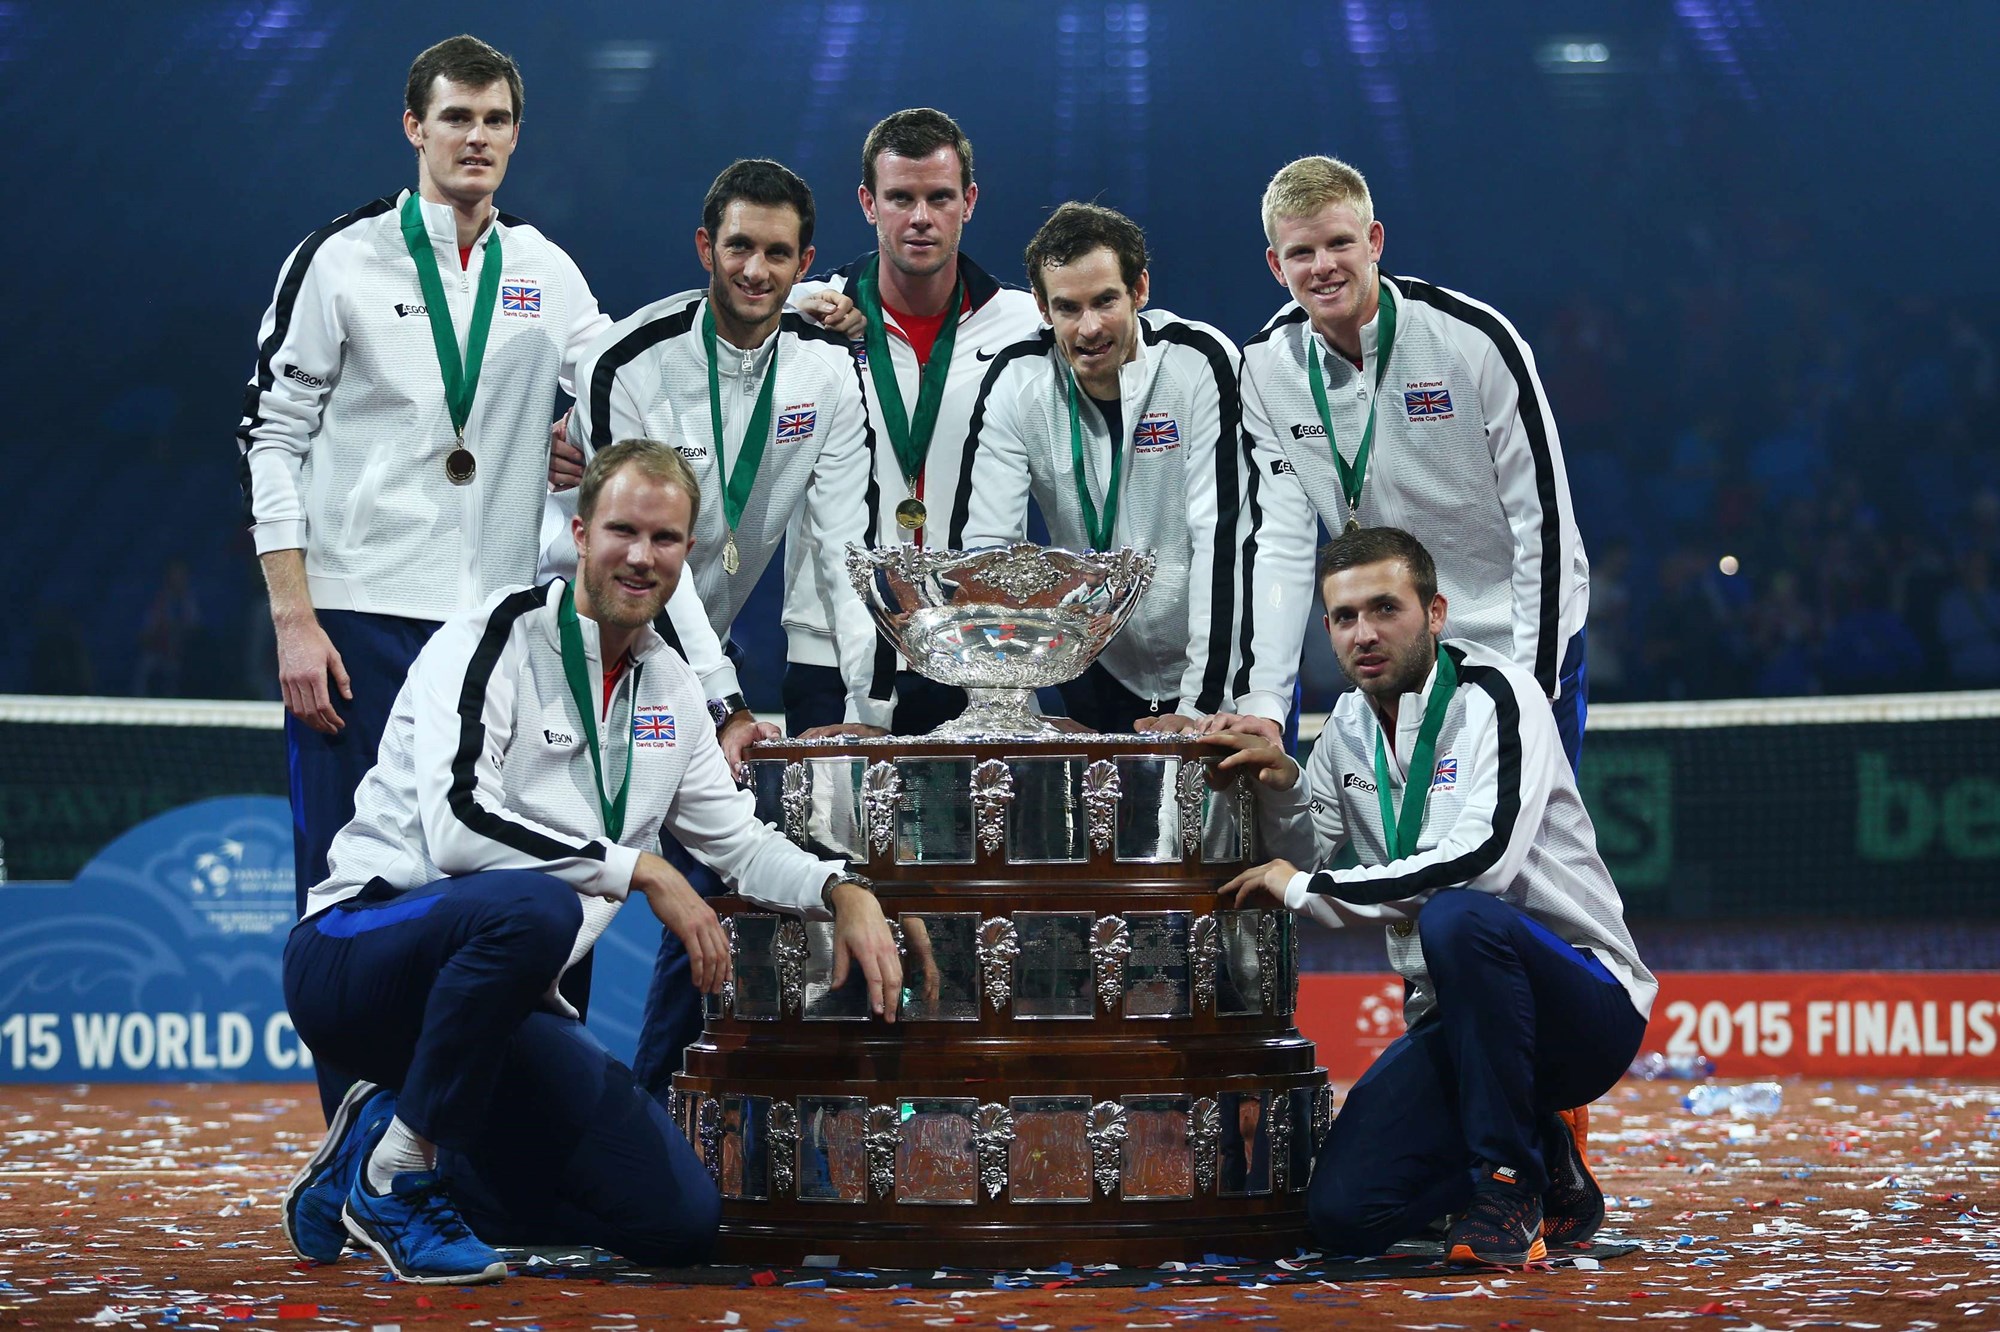 The 2015 Great Britain Davis Cup team with the trophy 